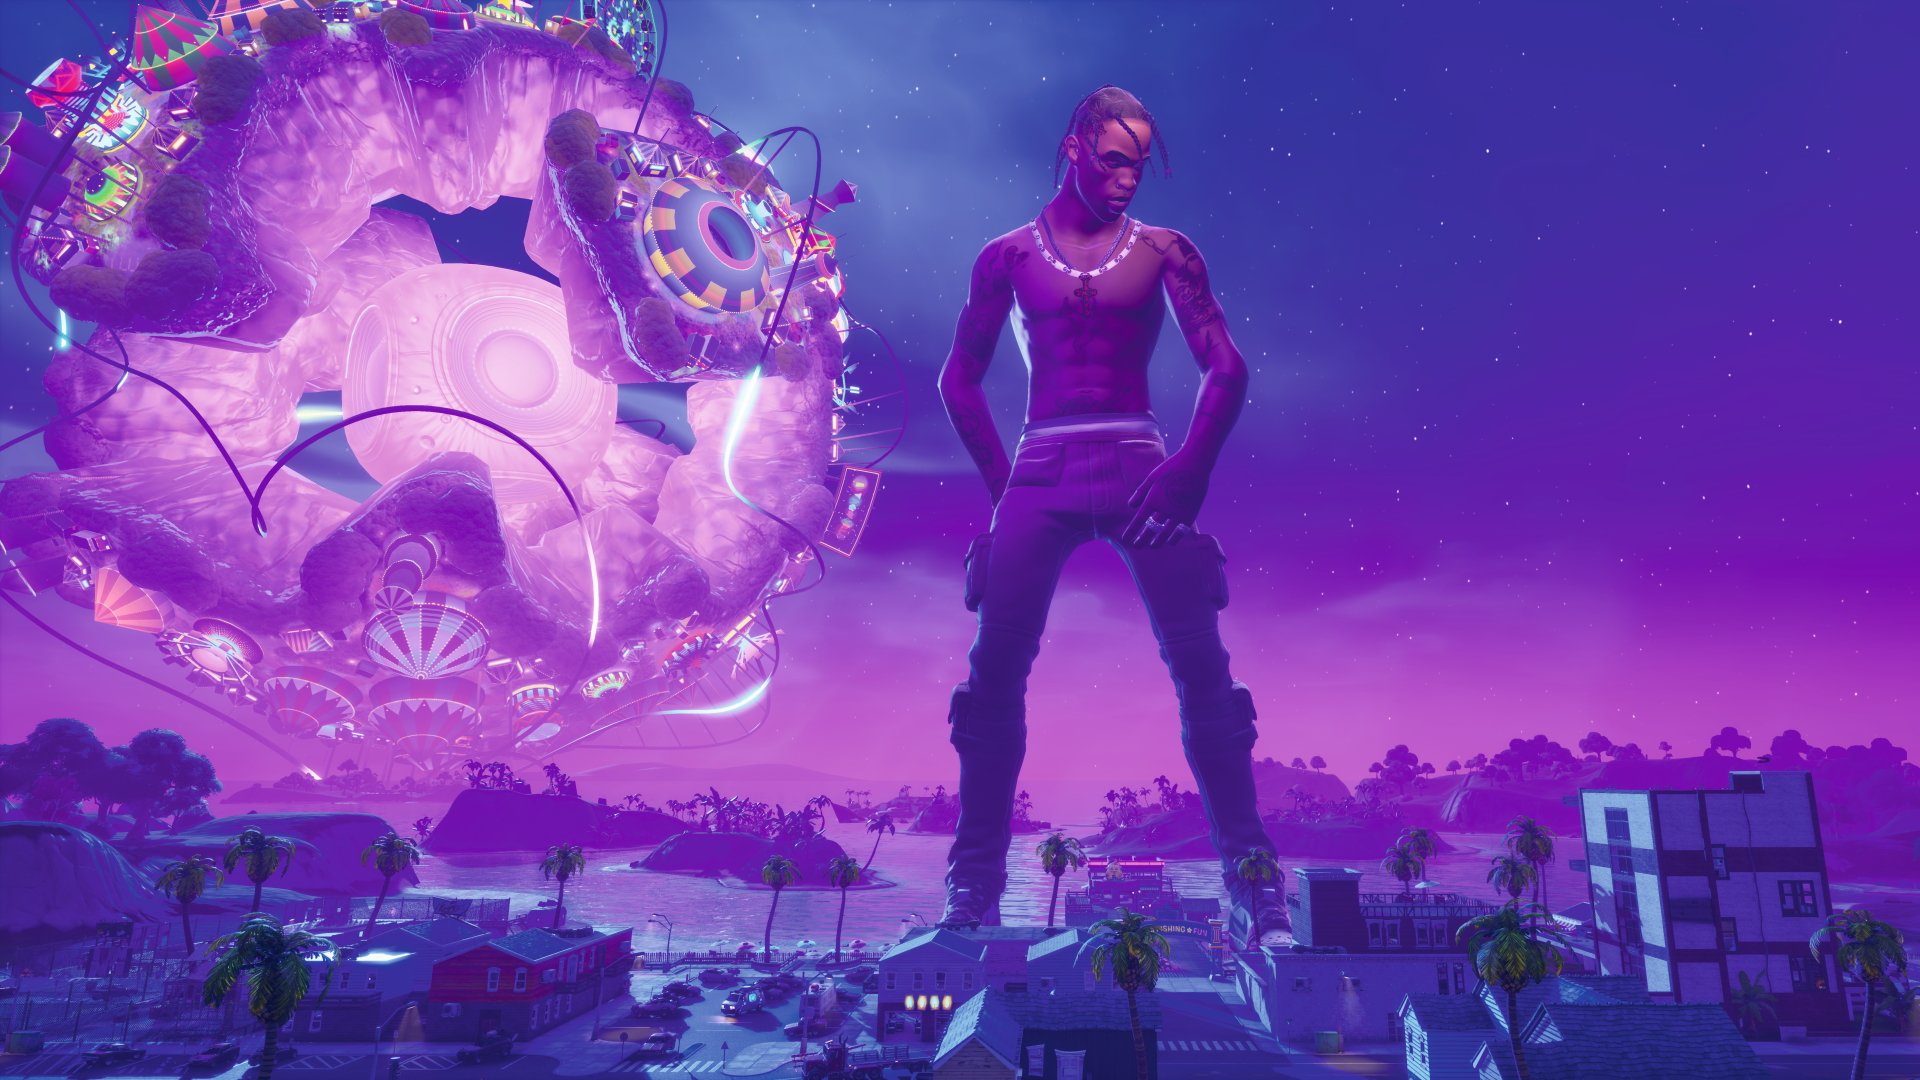 Fortnite x Minecraft merge in new live event created by fan